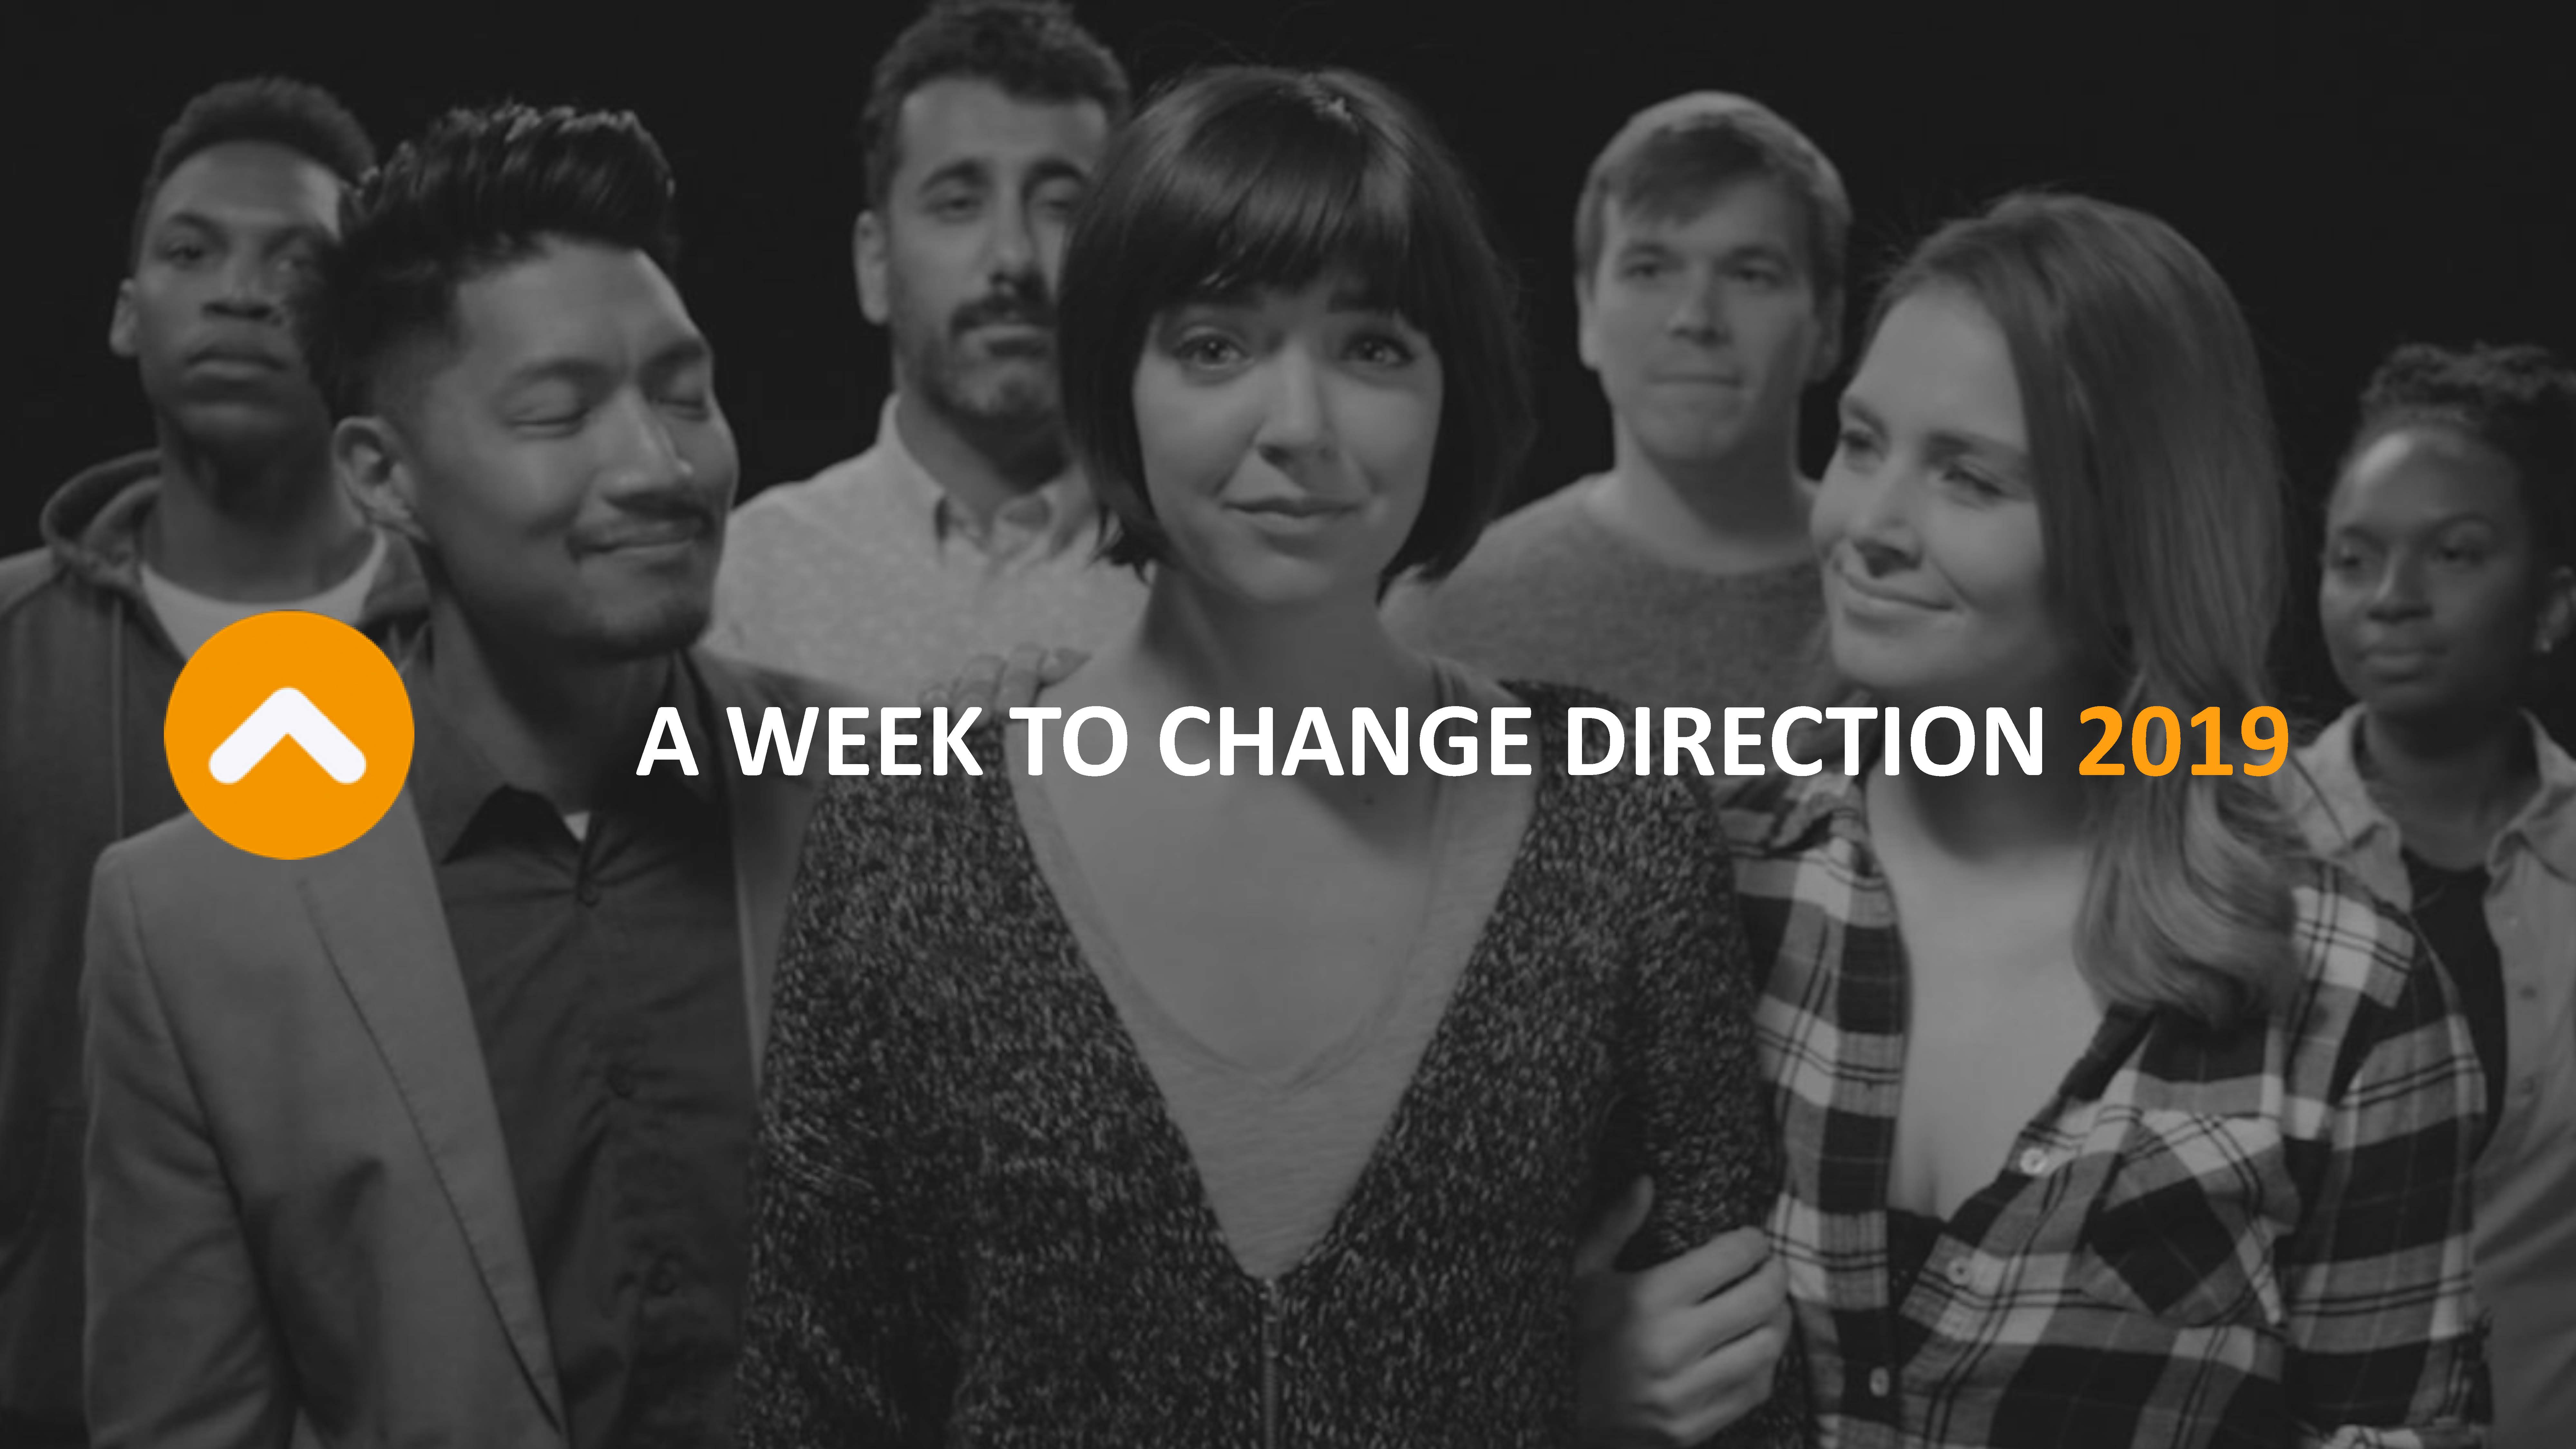 A week to change direction